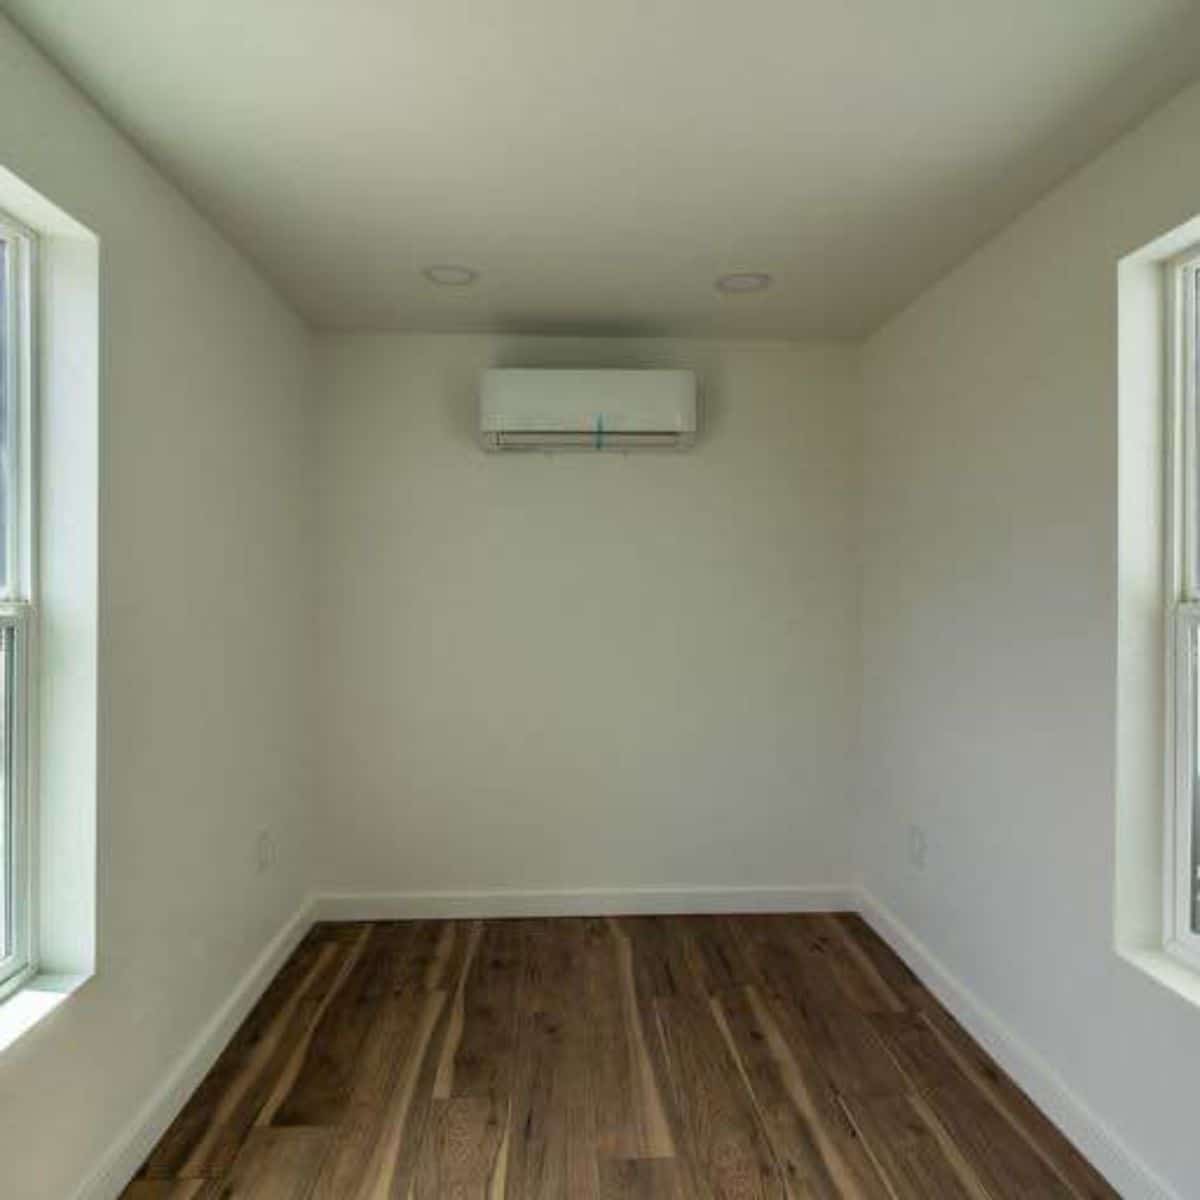 Bedroom area of 40’ Shipping Container Tiny House has split air condition unit installed